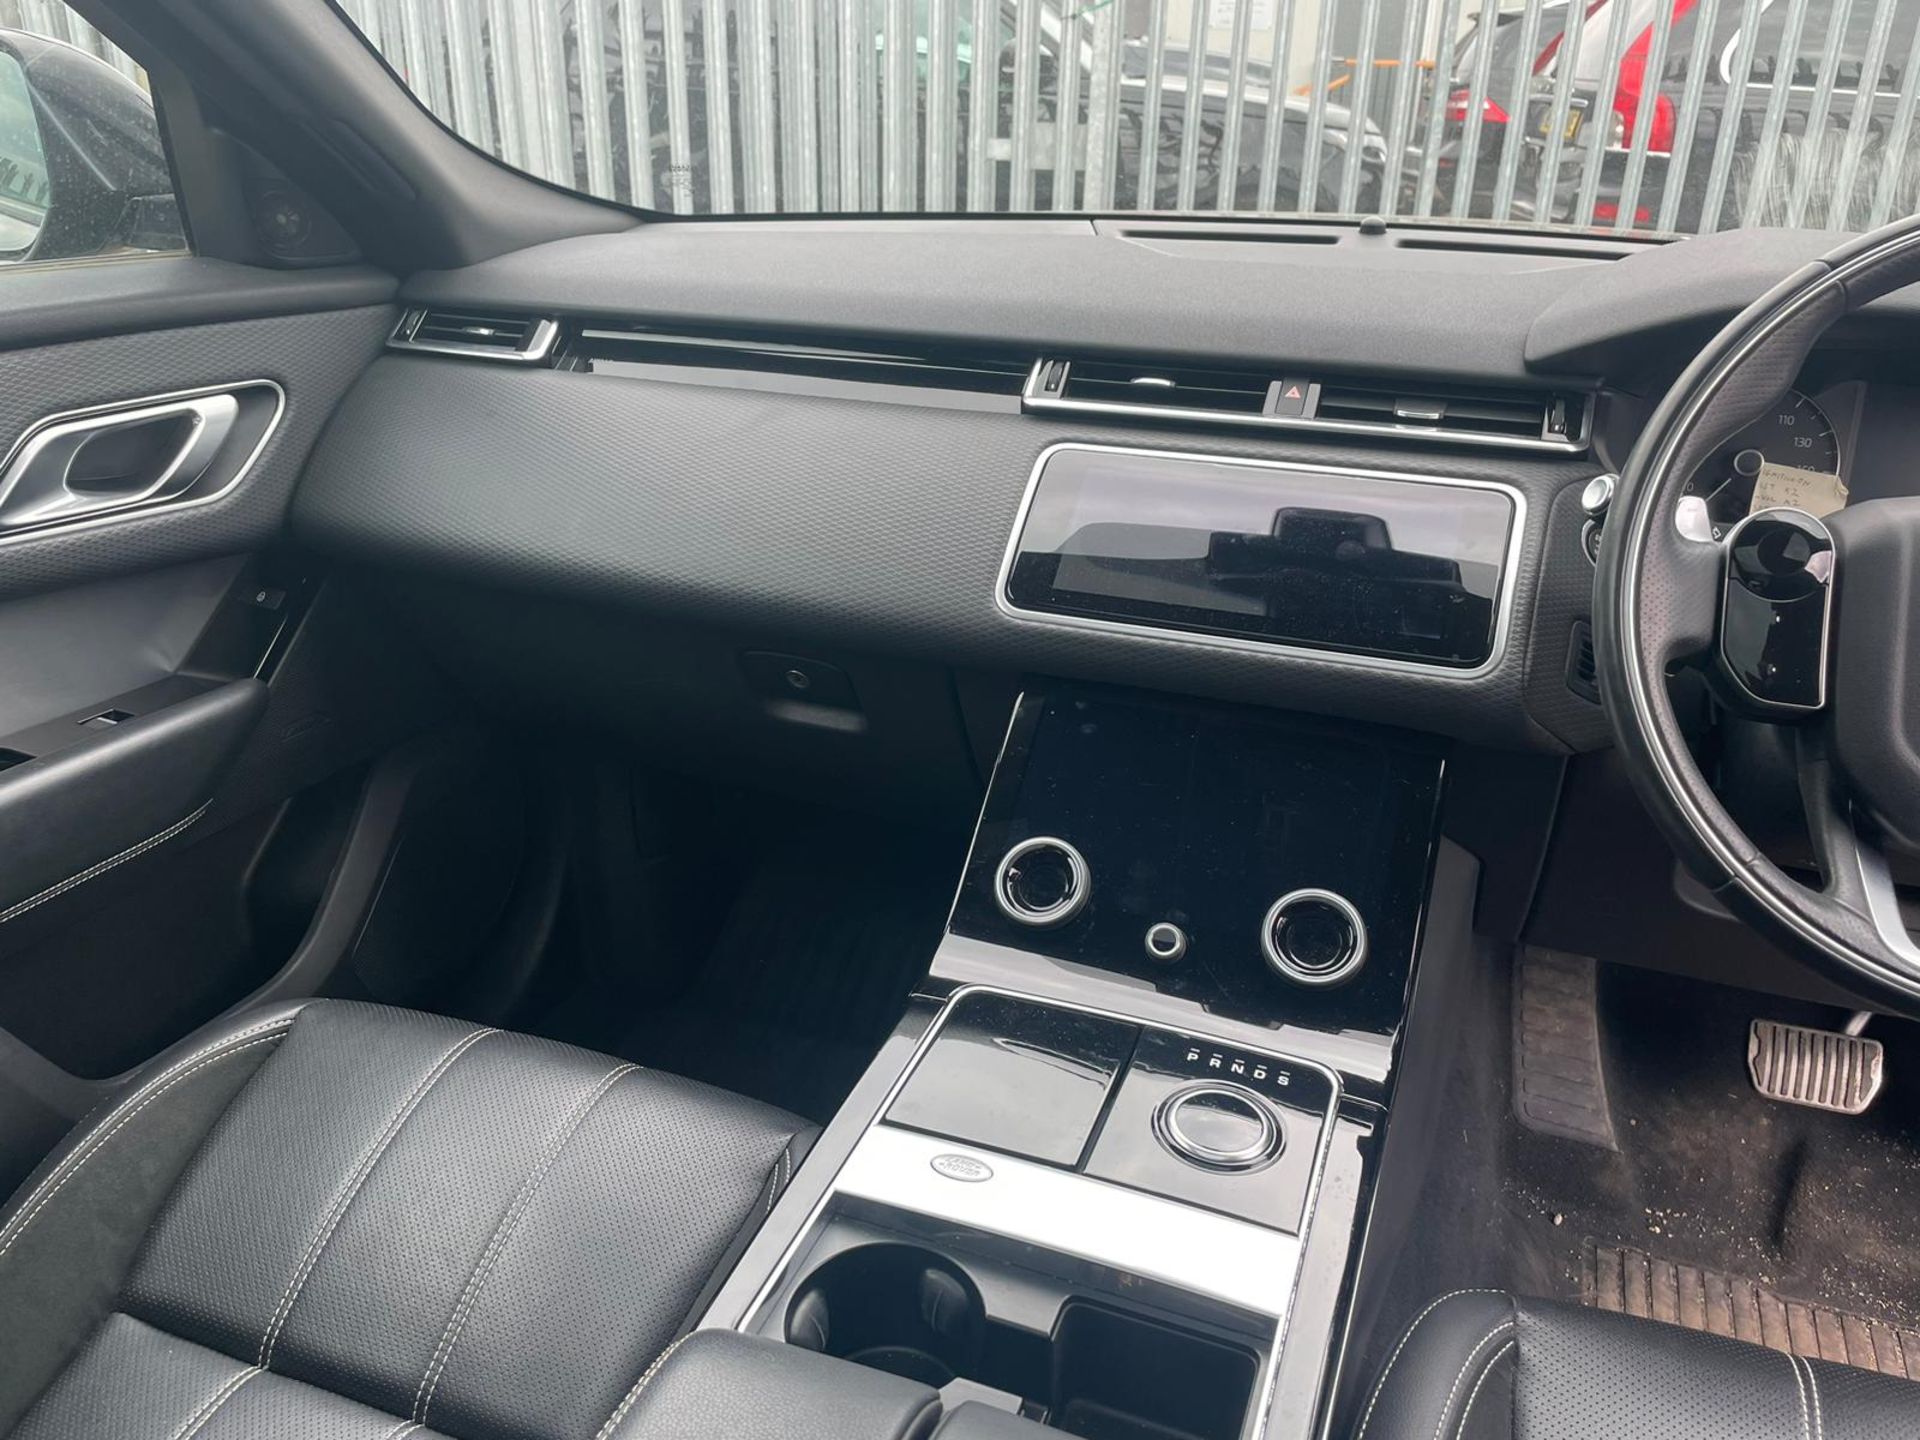 Land Rover Range Rover Velar 2.0 D240 R-Dynamic S 2018 '18 Reg' 4WD - Panoramic Roof- ULEZ Compliant - Image 19 of 33